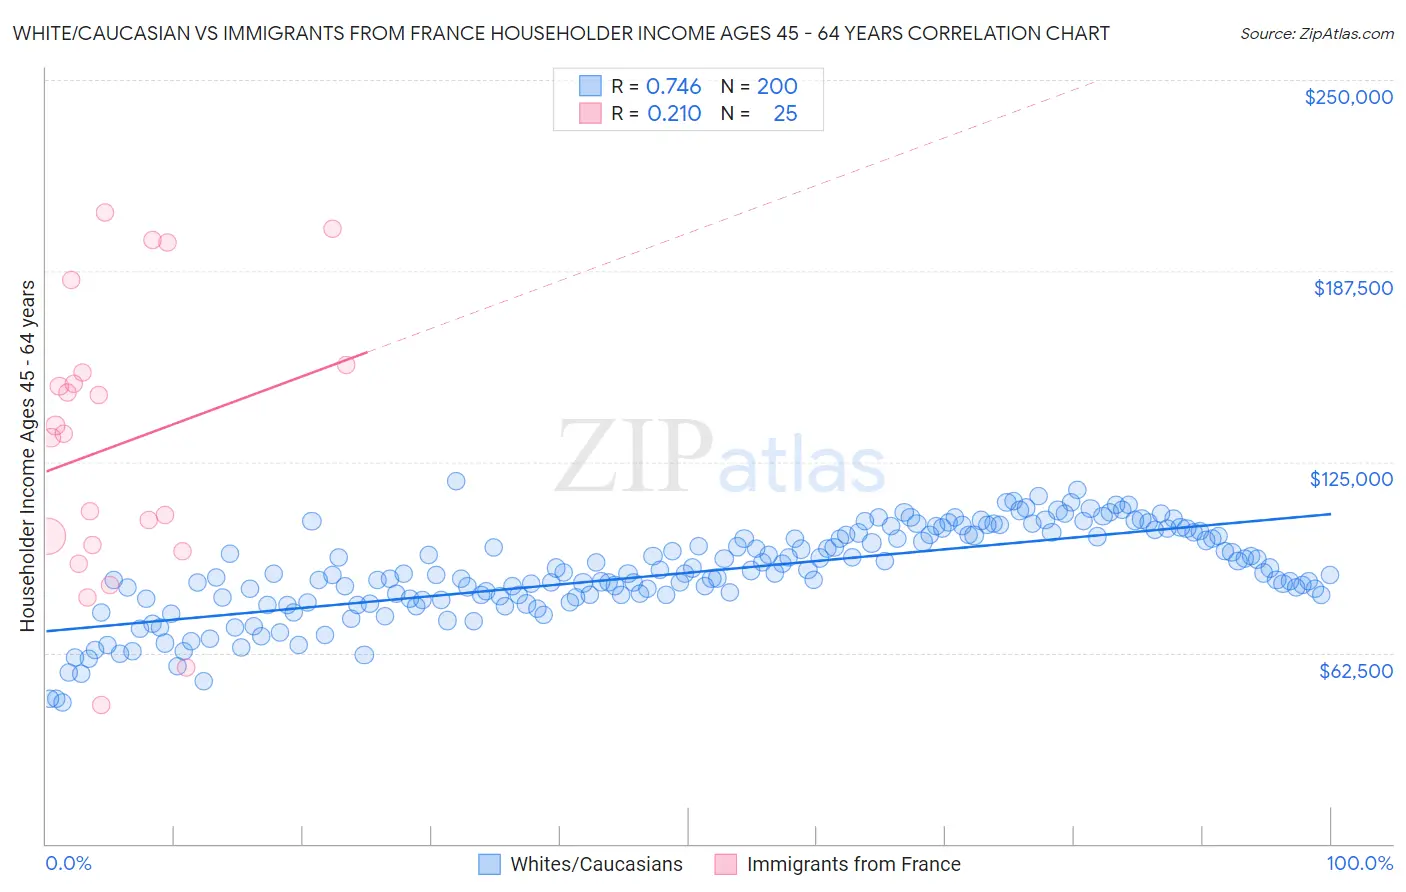 White/Caucasian vs Immigrants from France Householder Income Ages 45 - 64 years